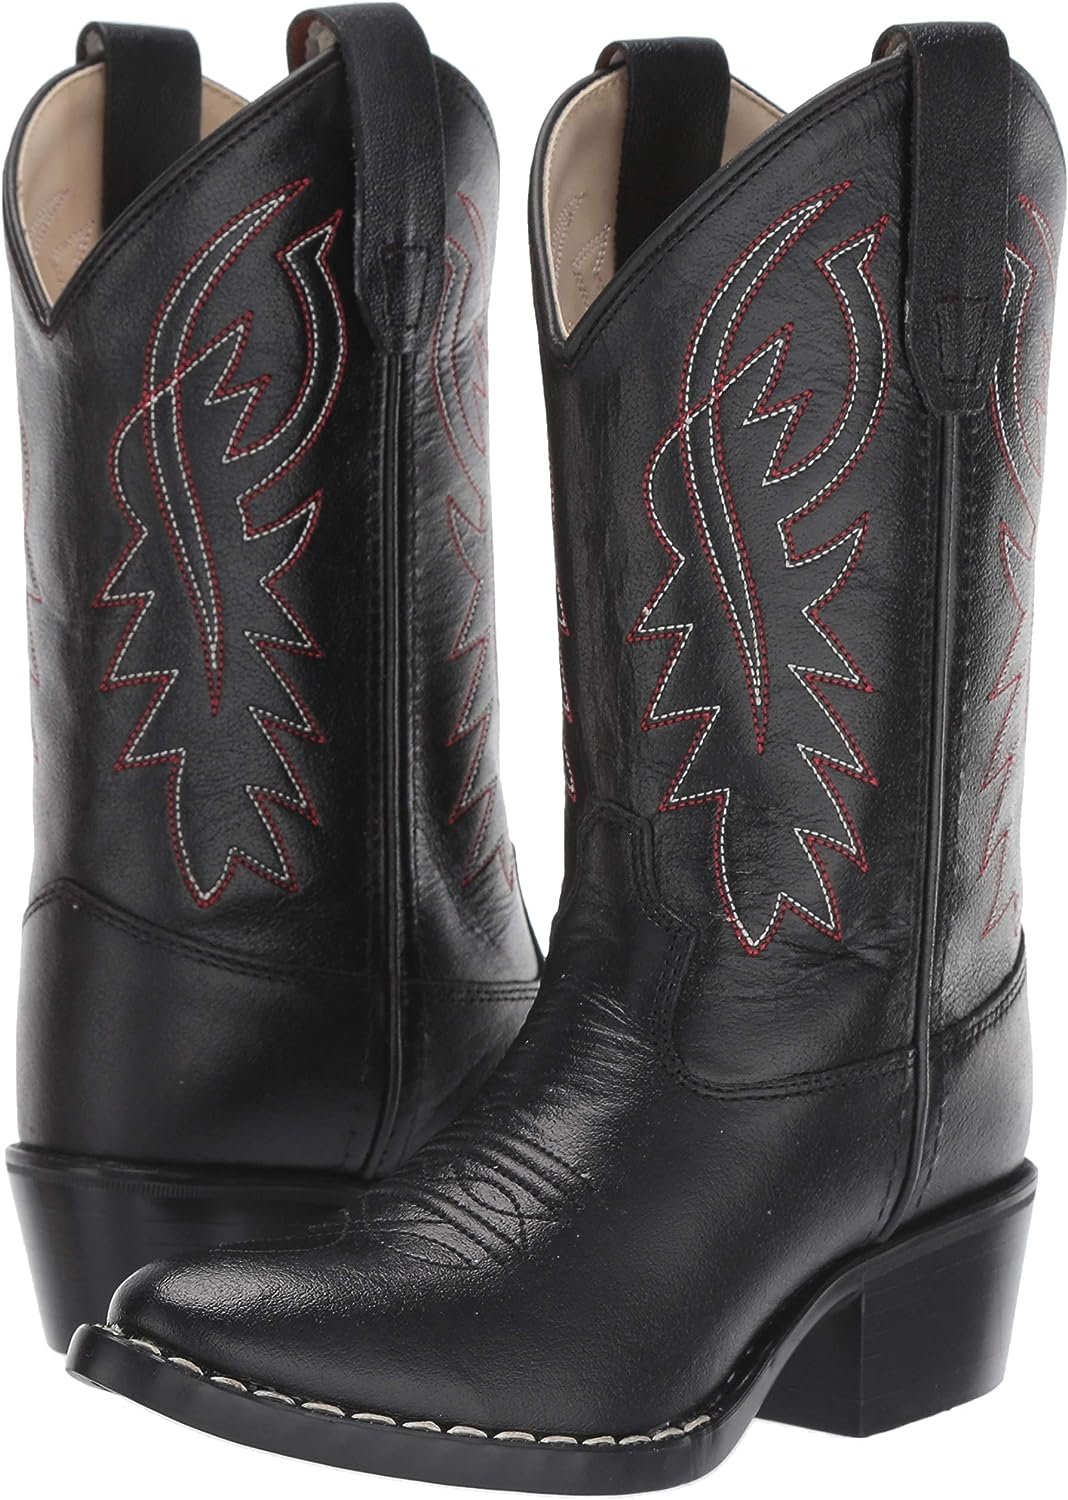 Old West Kids Boots Unisex-Child J Toe Western Boot